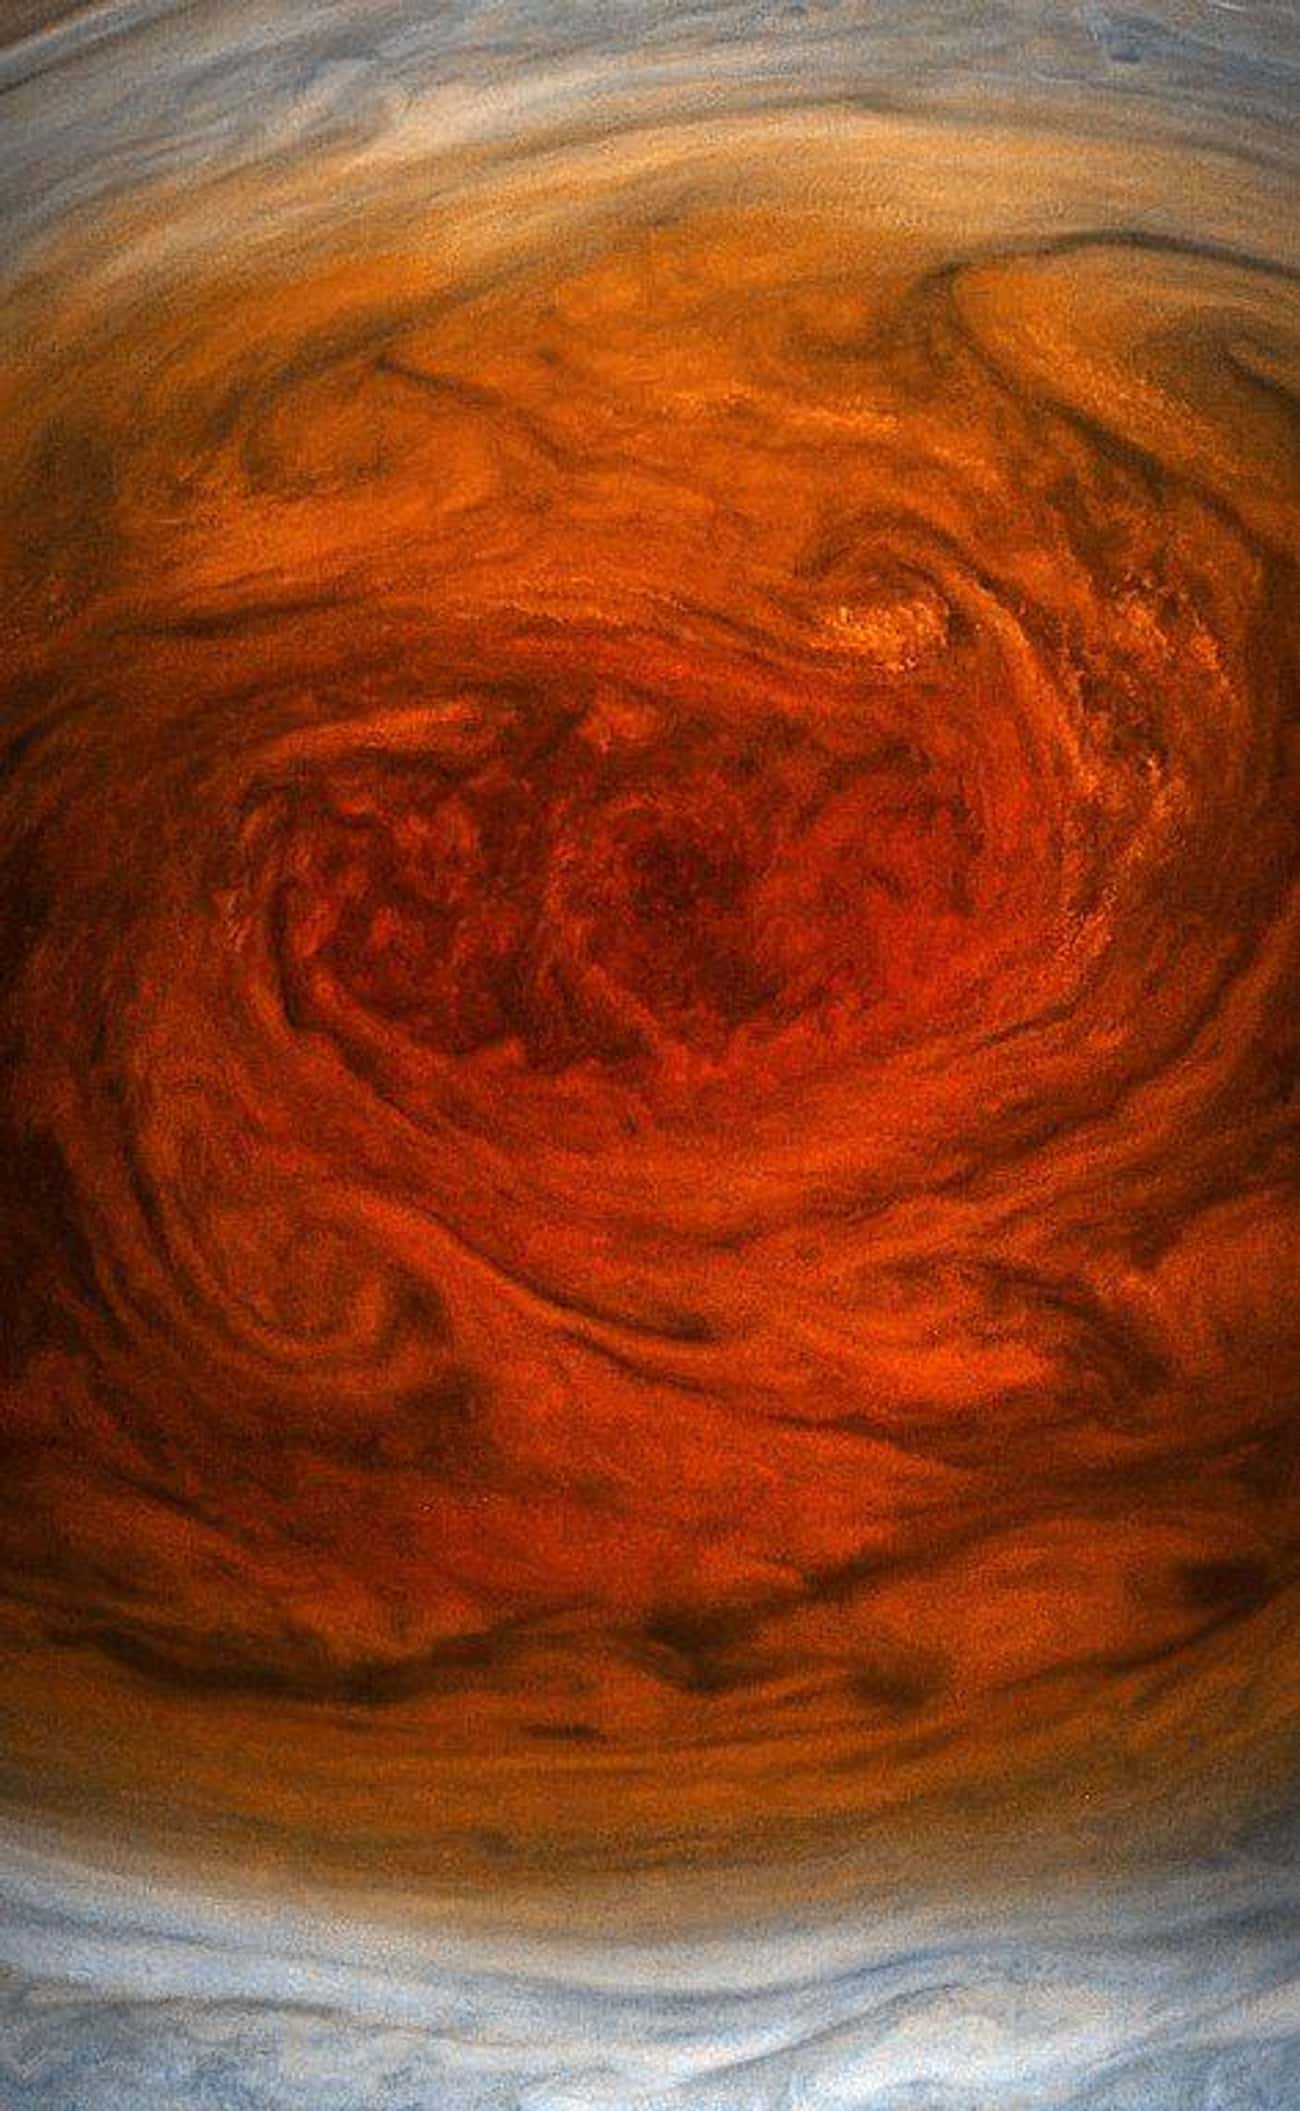 Jupiter's Great Red Spot Is So Loud That It Heats Up The Planet's Atmosphere